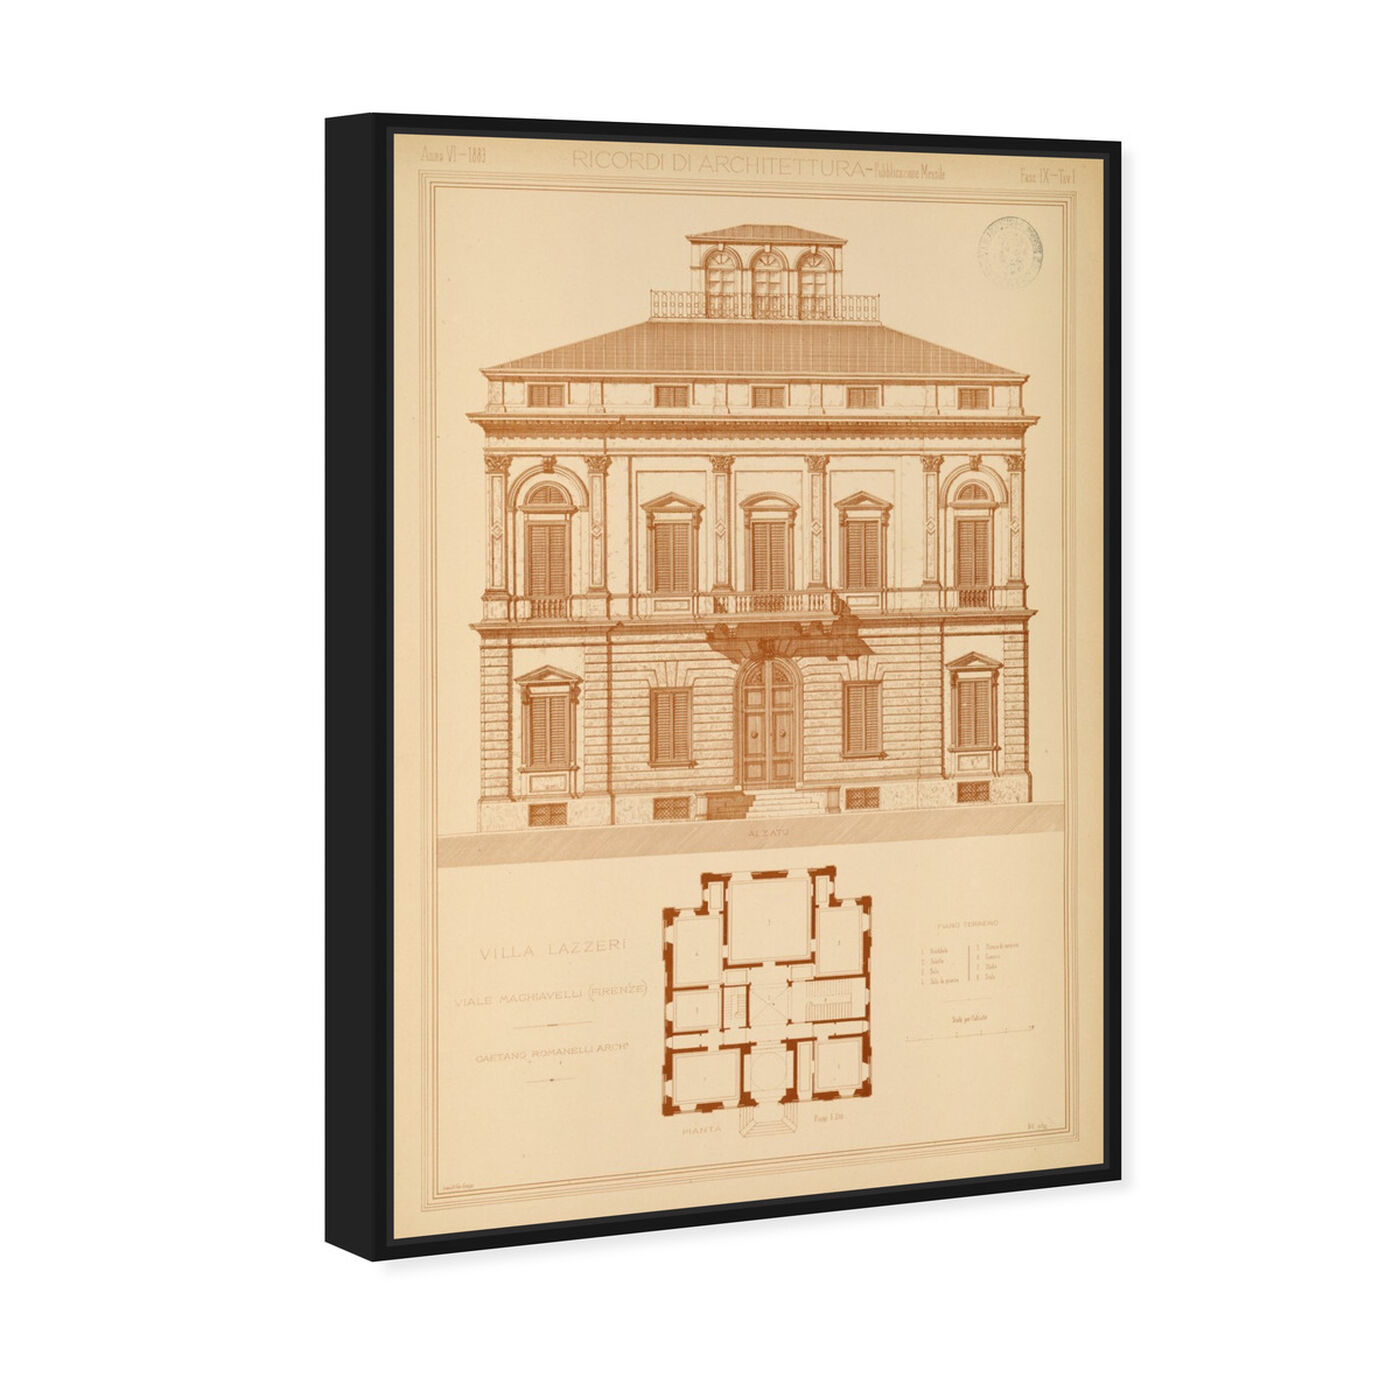 Angled view of Villa Lazzeri - The Art Cabinet featuring architecture and buildings and structures art.